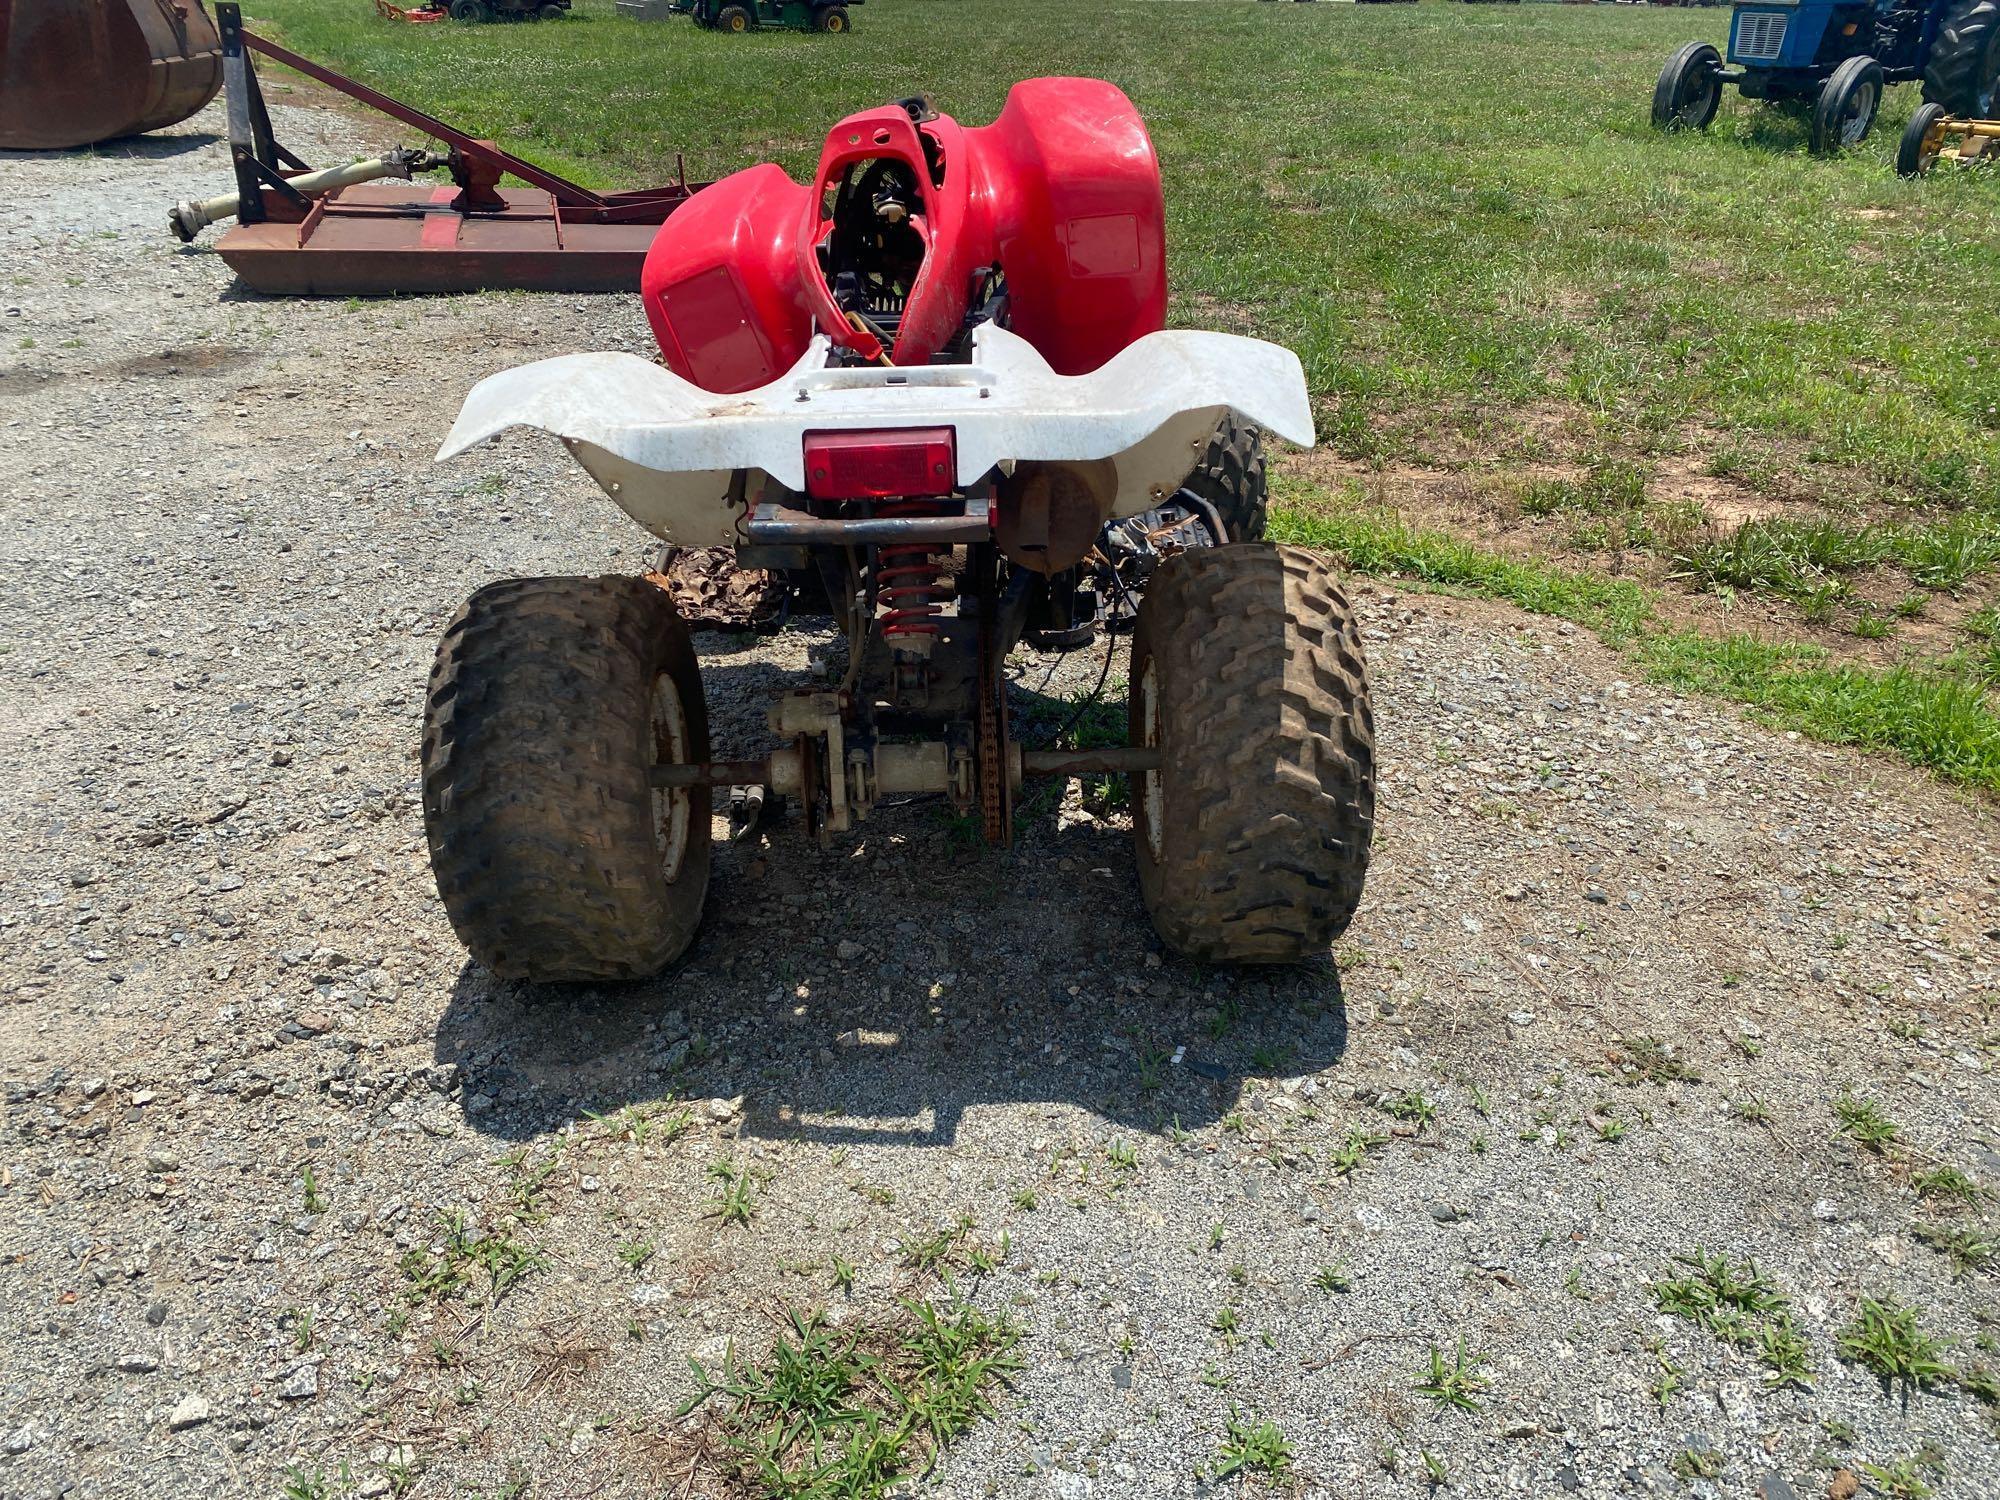 Four Wheeler Parts Only